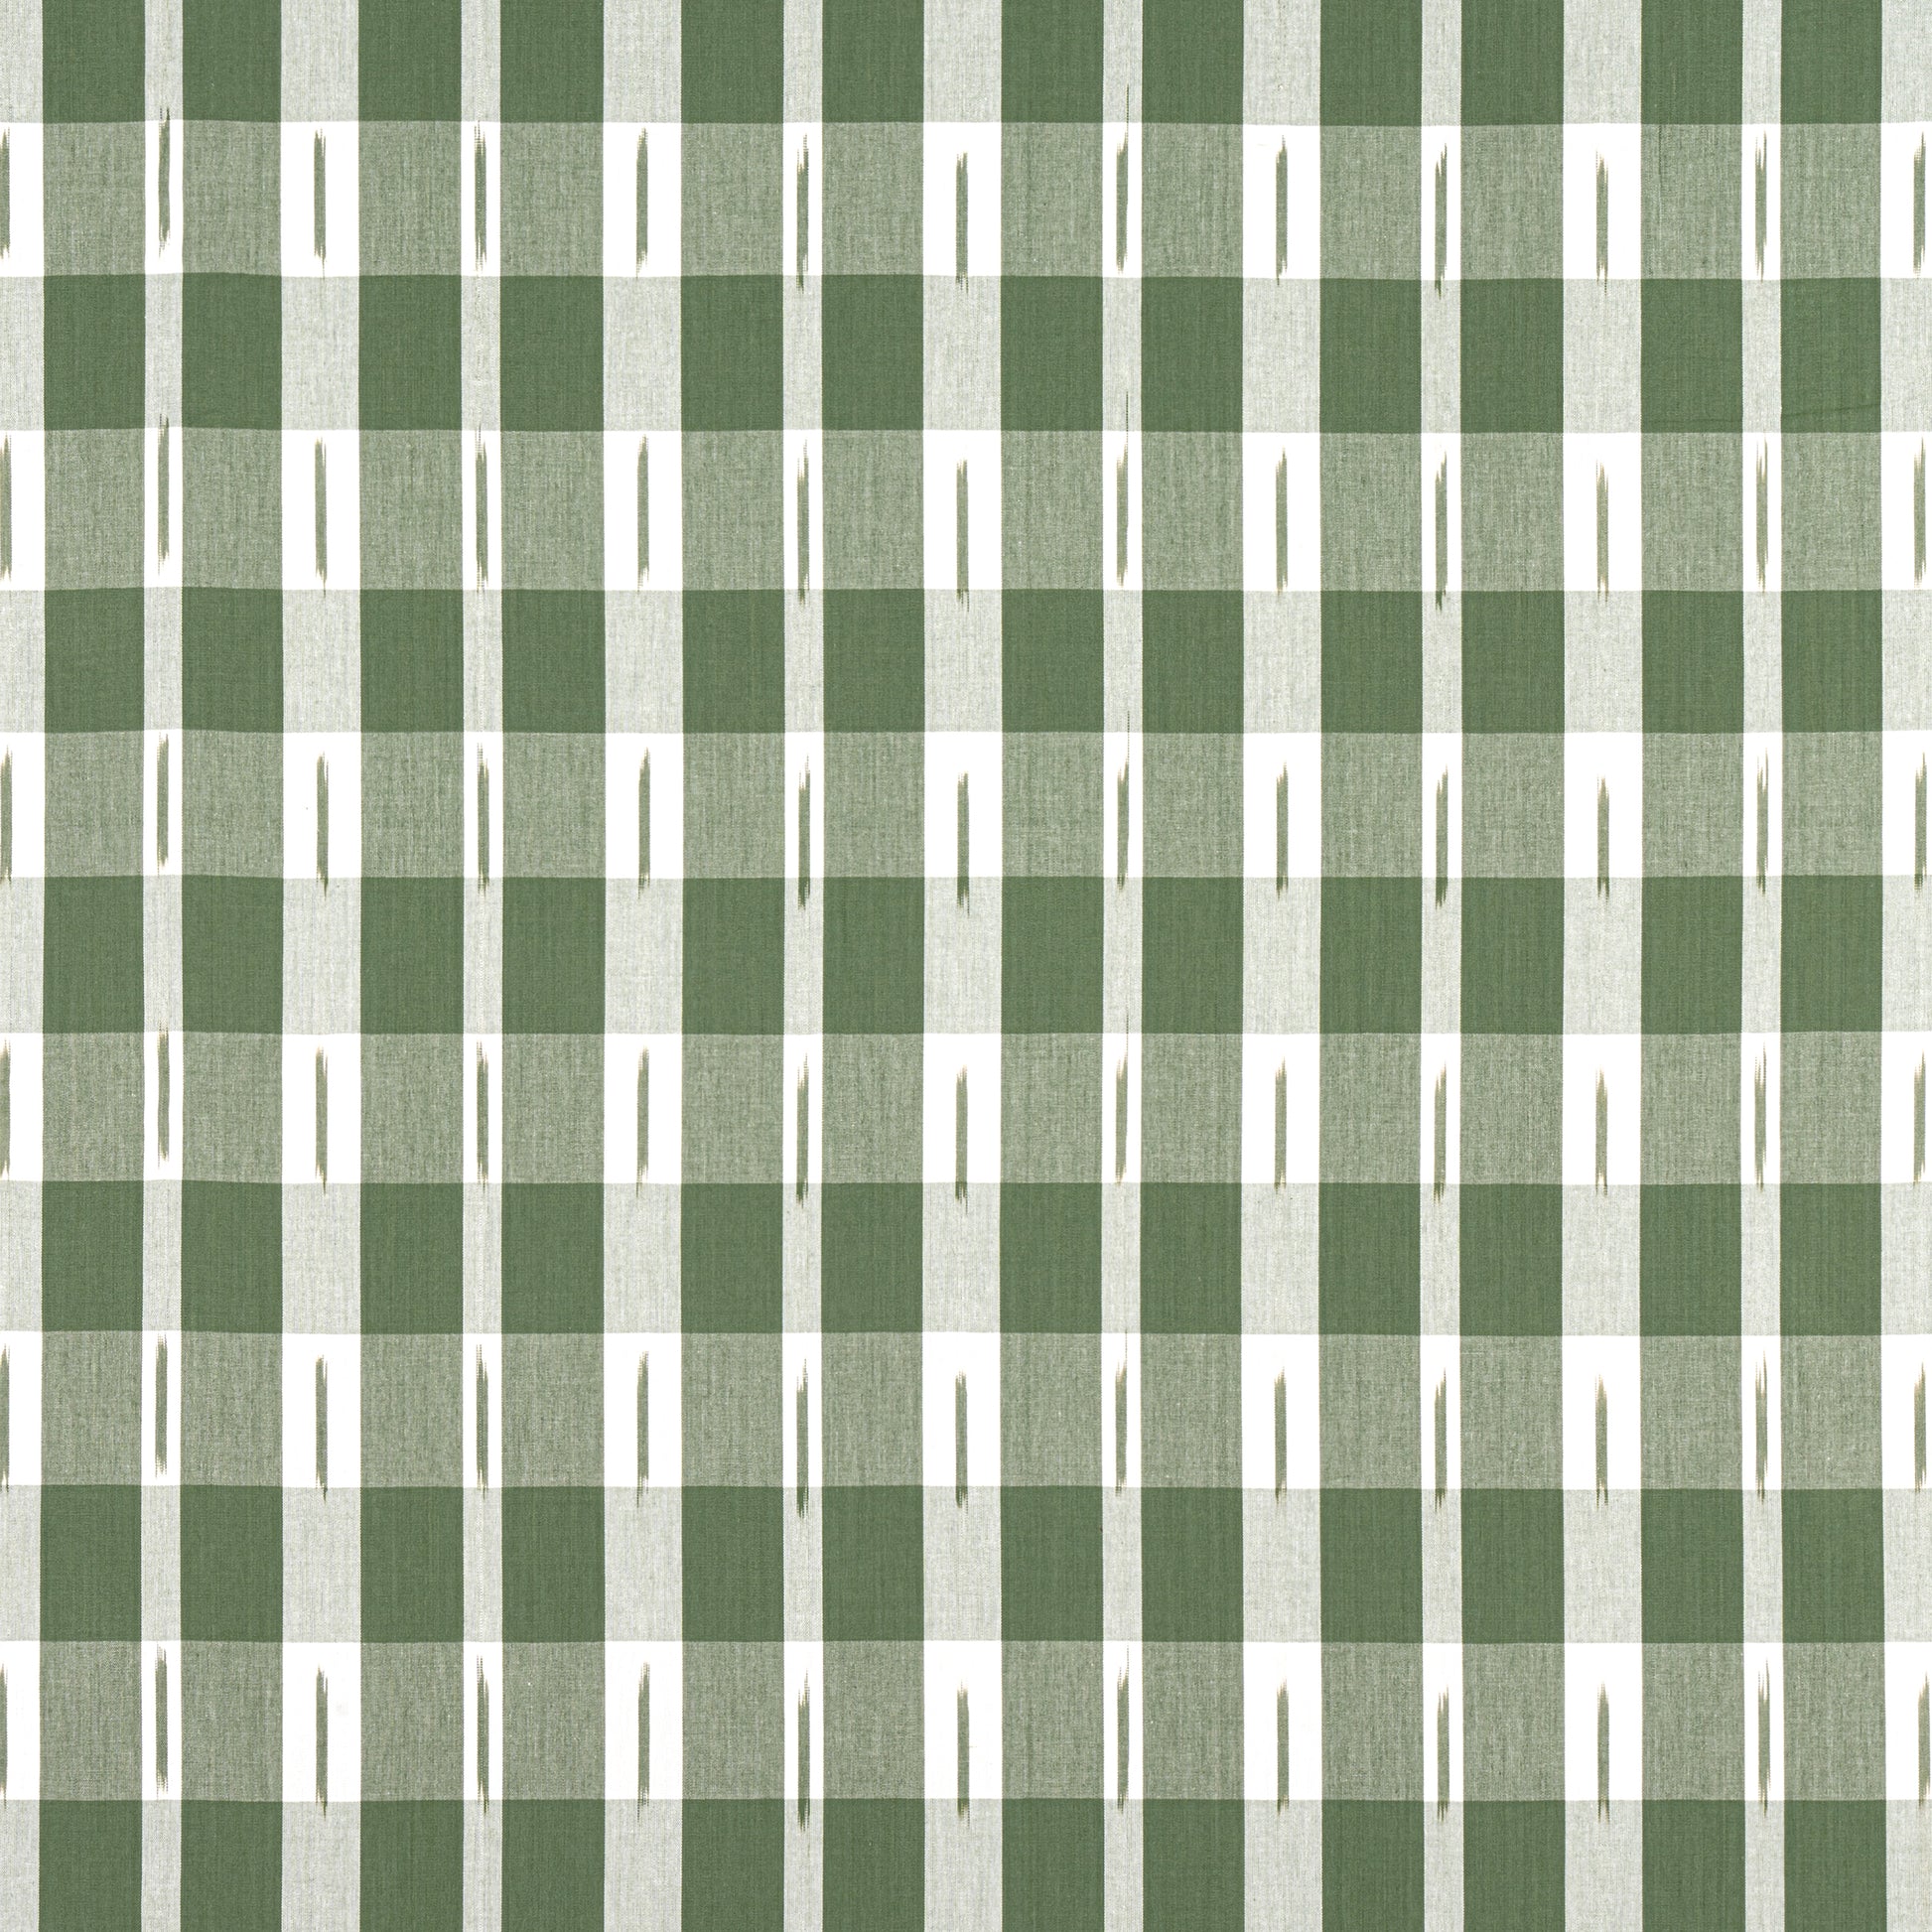 Purchase Thibaut Fabric Item# W736437 pattern name Ellagrey Check color Green